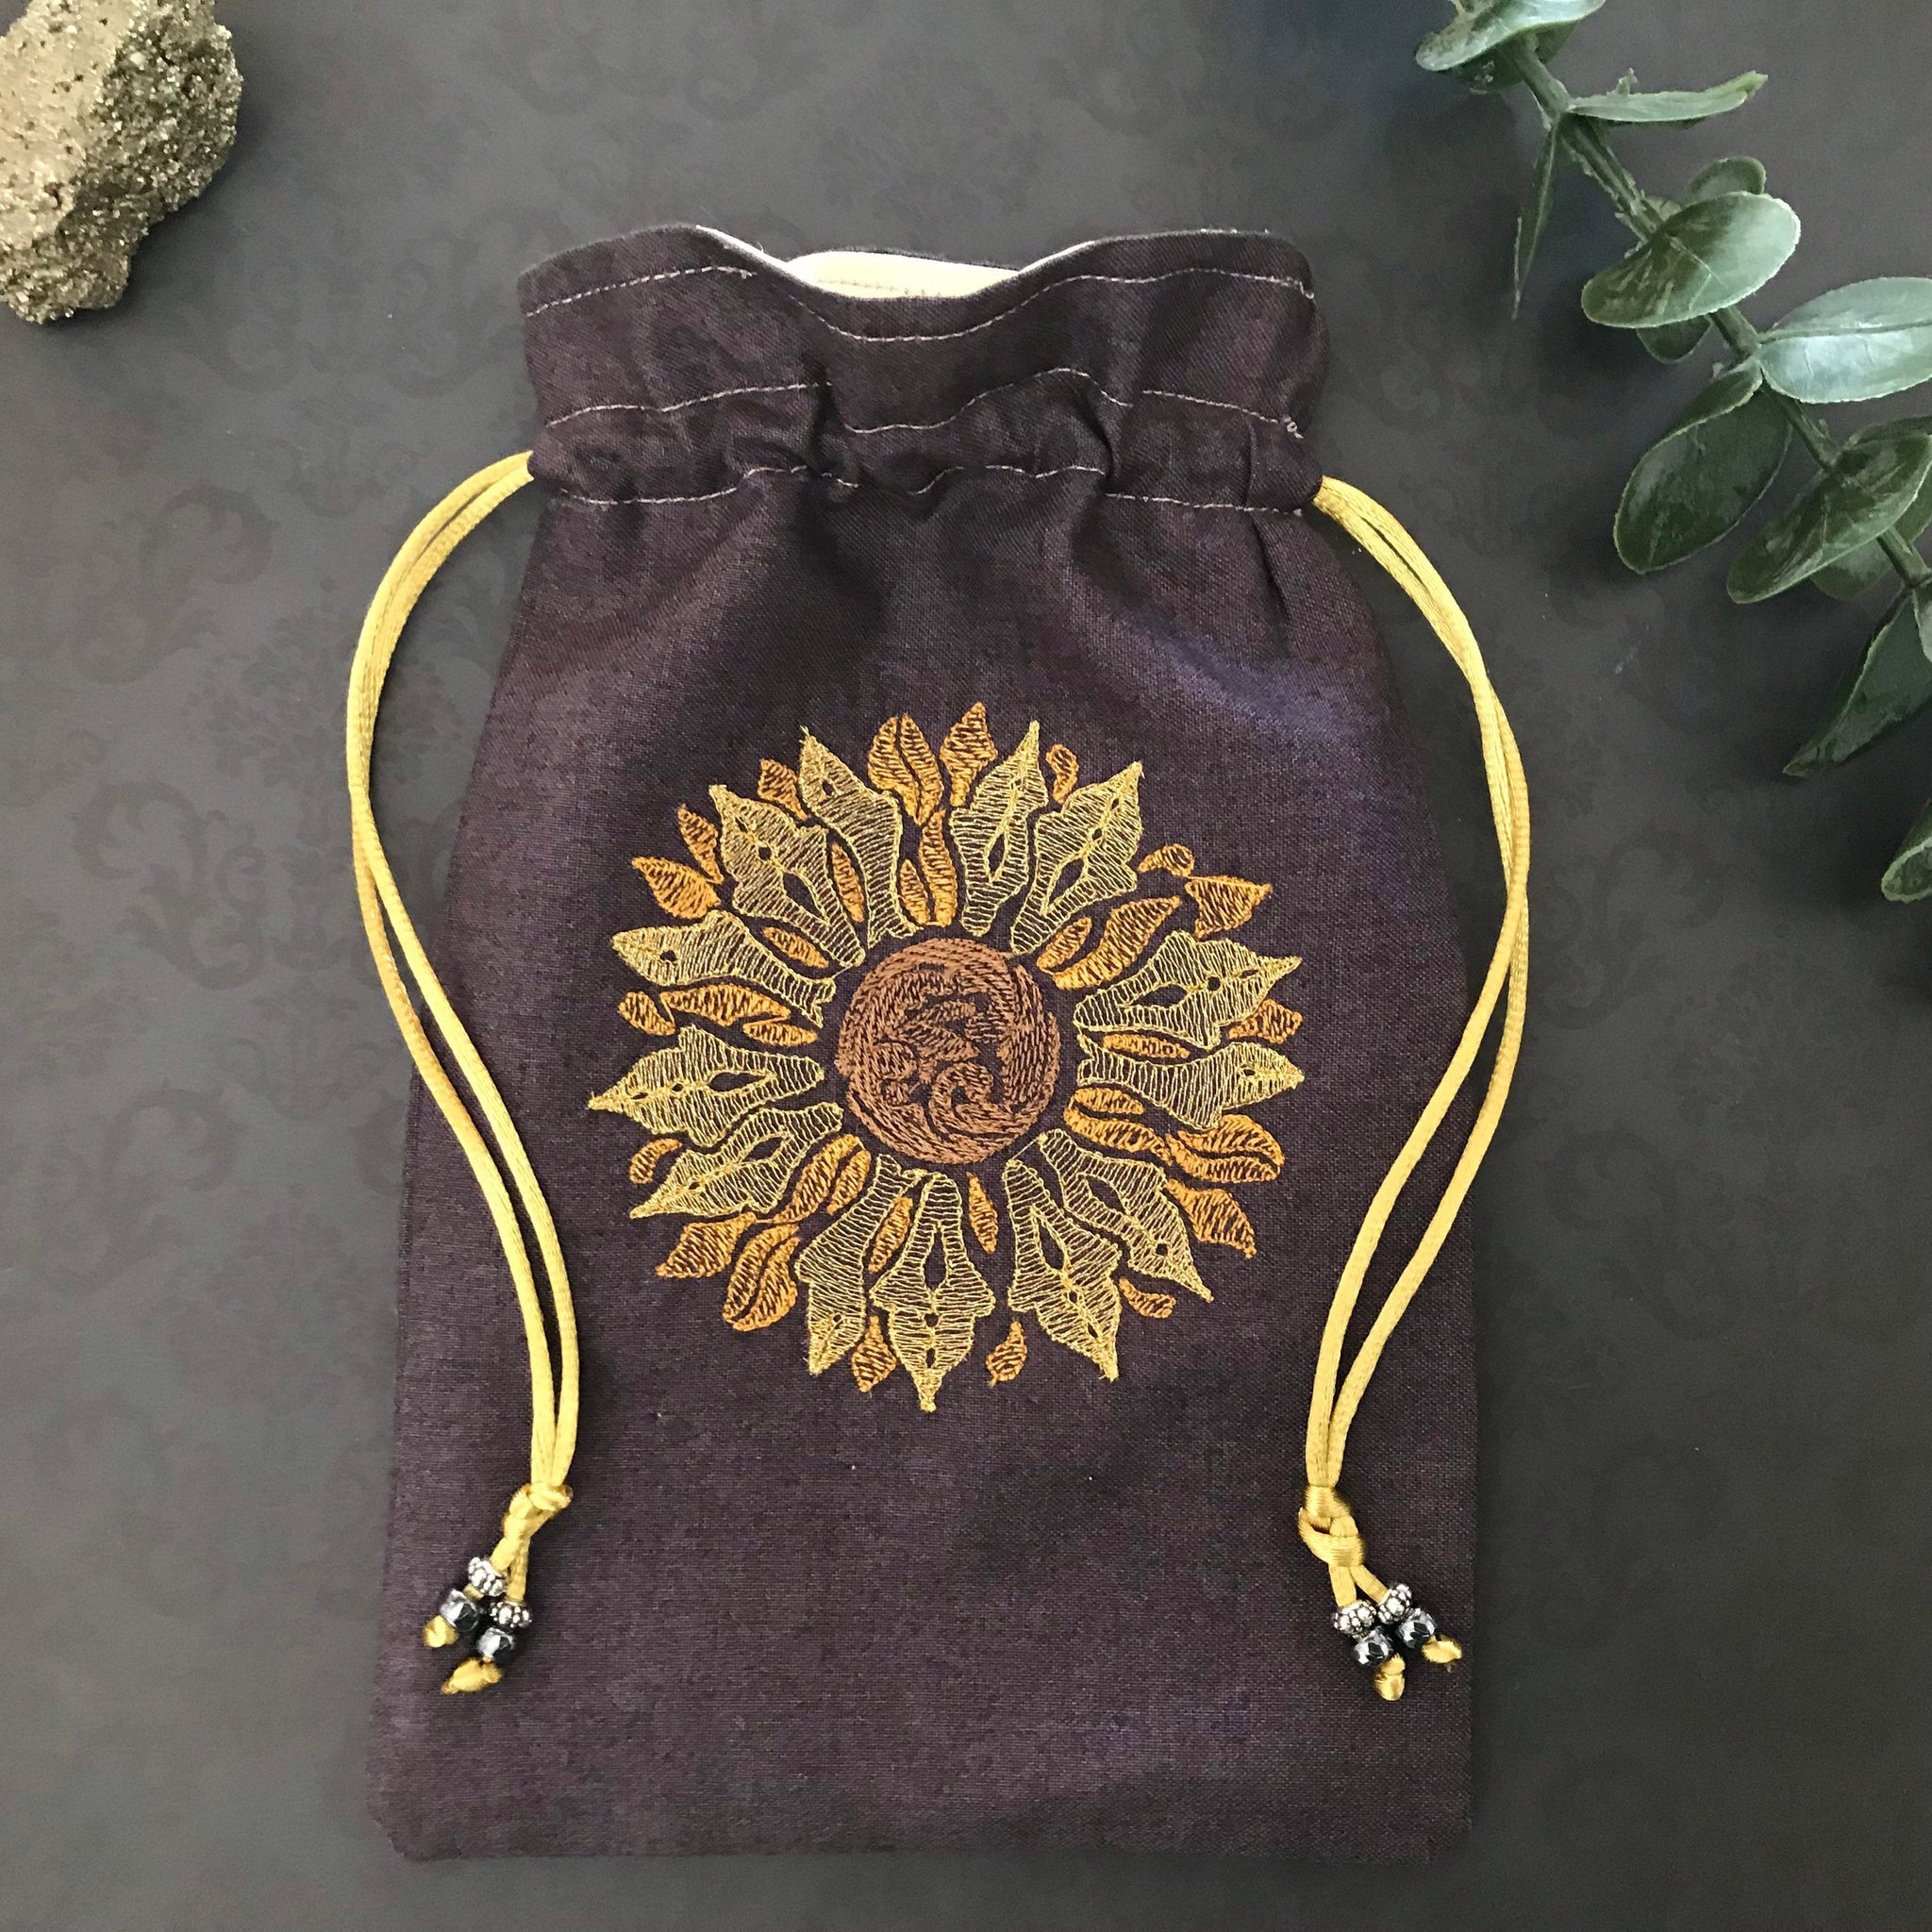 Embroidered Sunflower Pouch